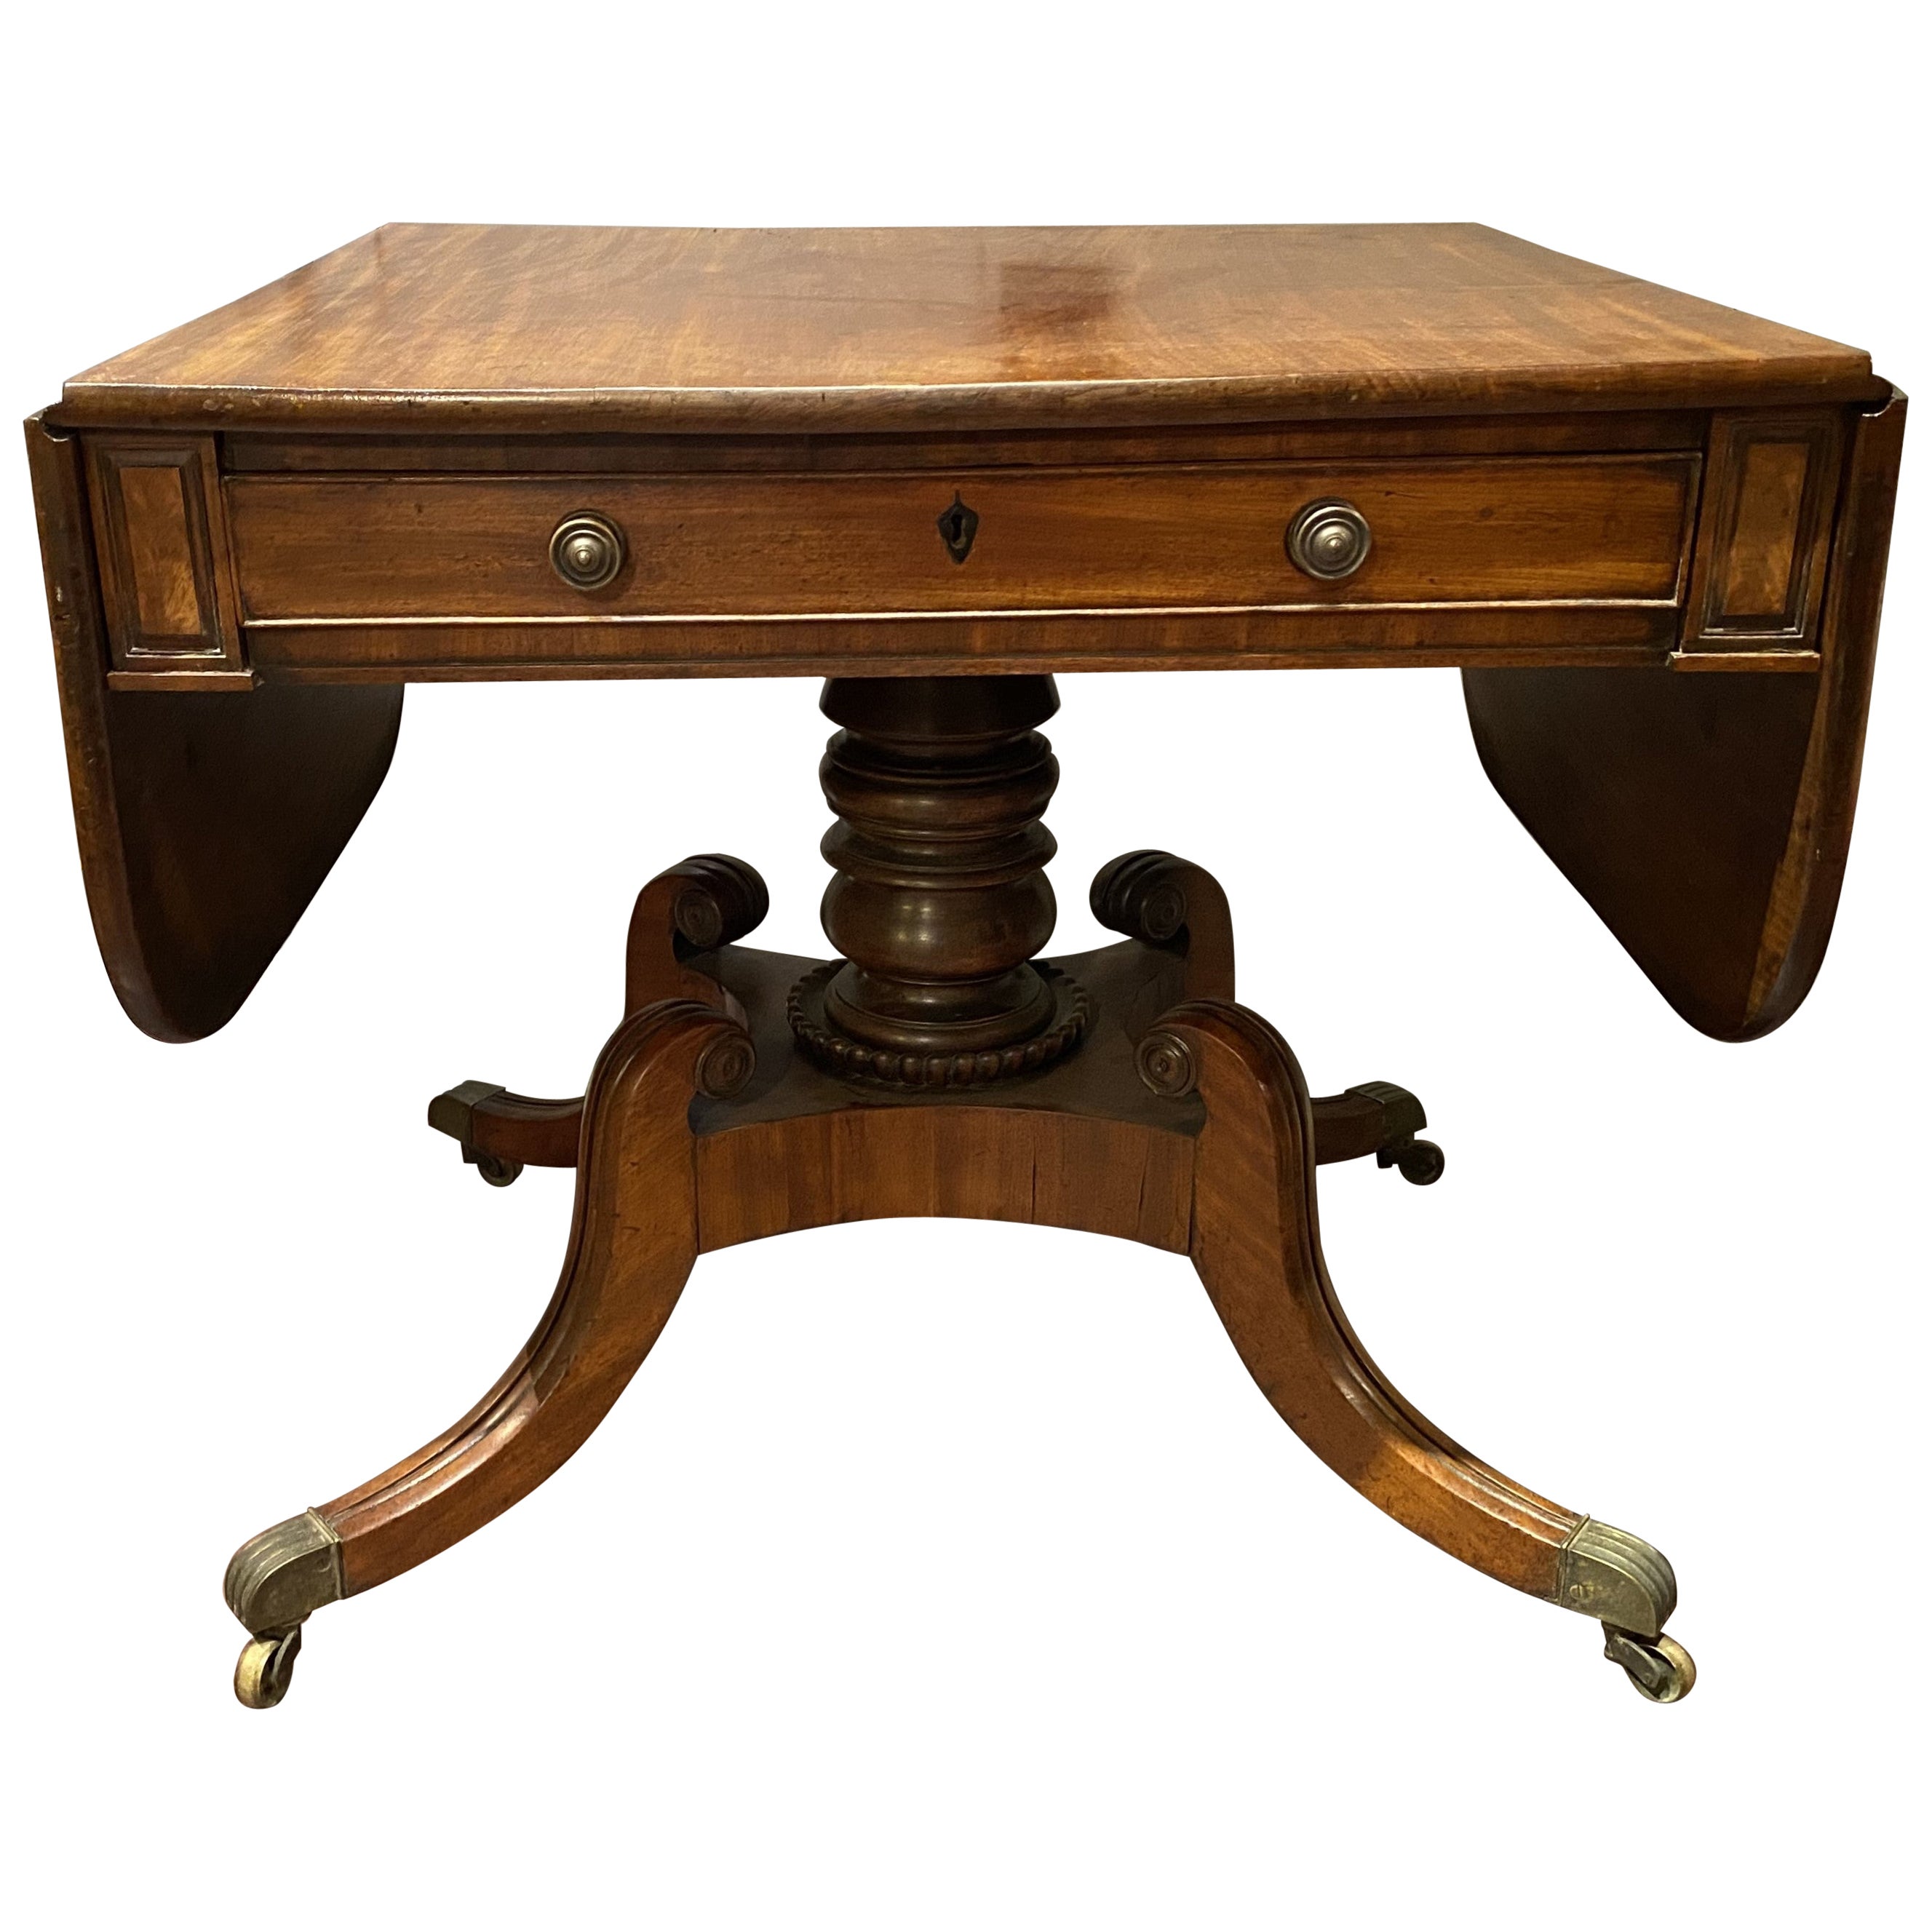 19th c Late Georgian or Regency Mahogany One Drawer Drop Leaf Library Table For Sale